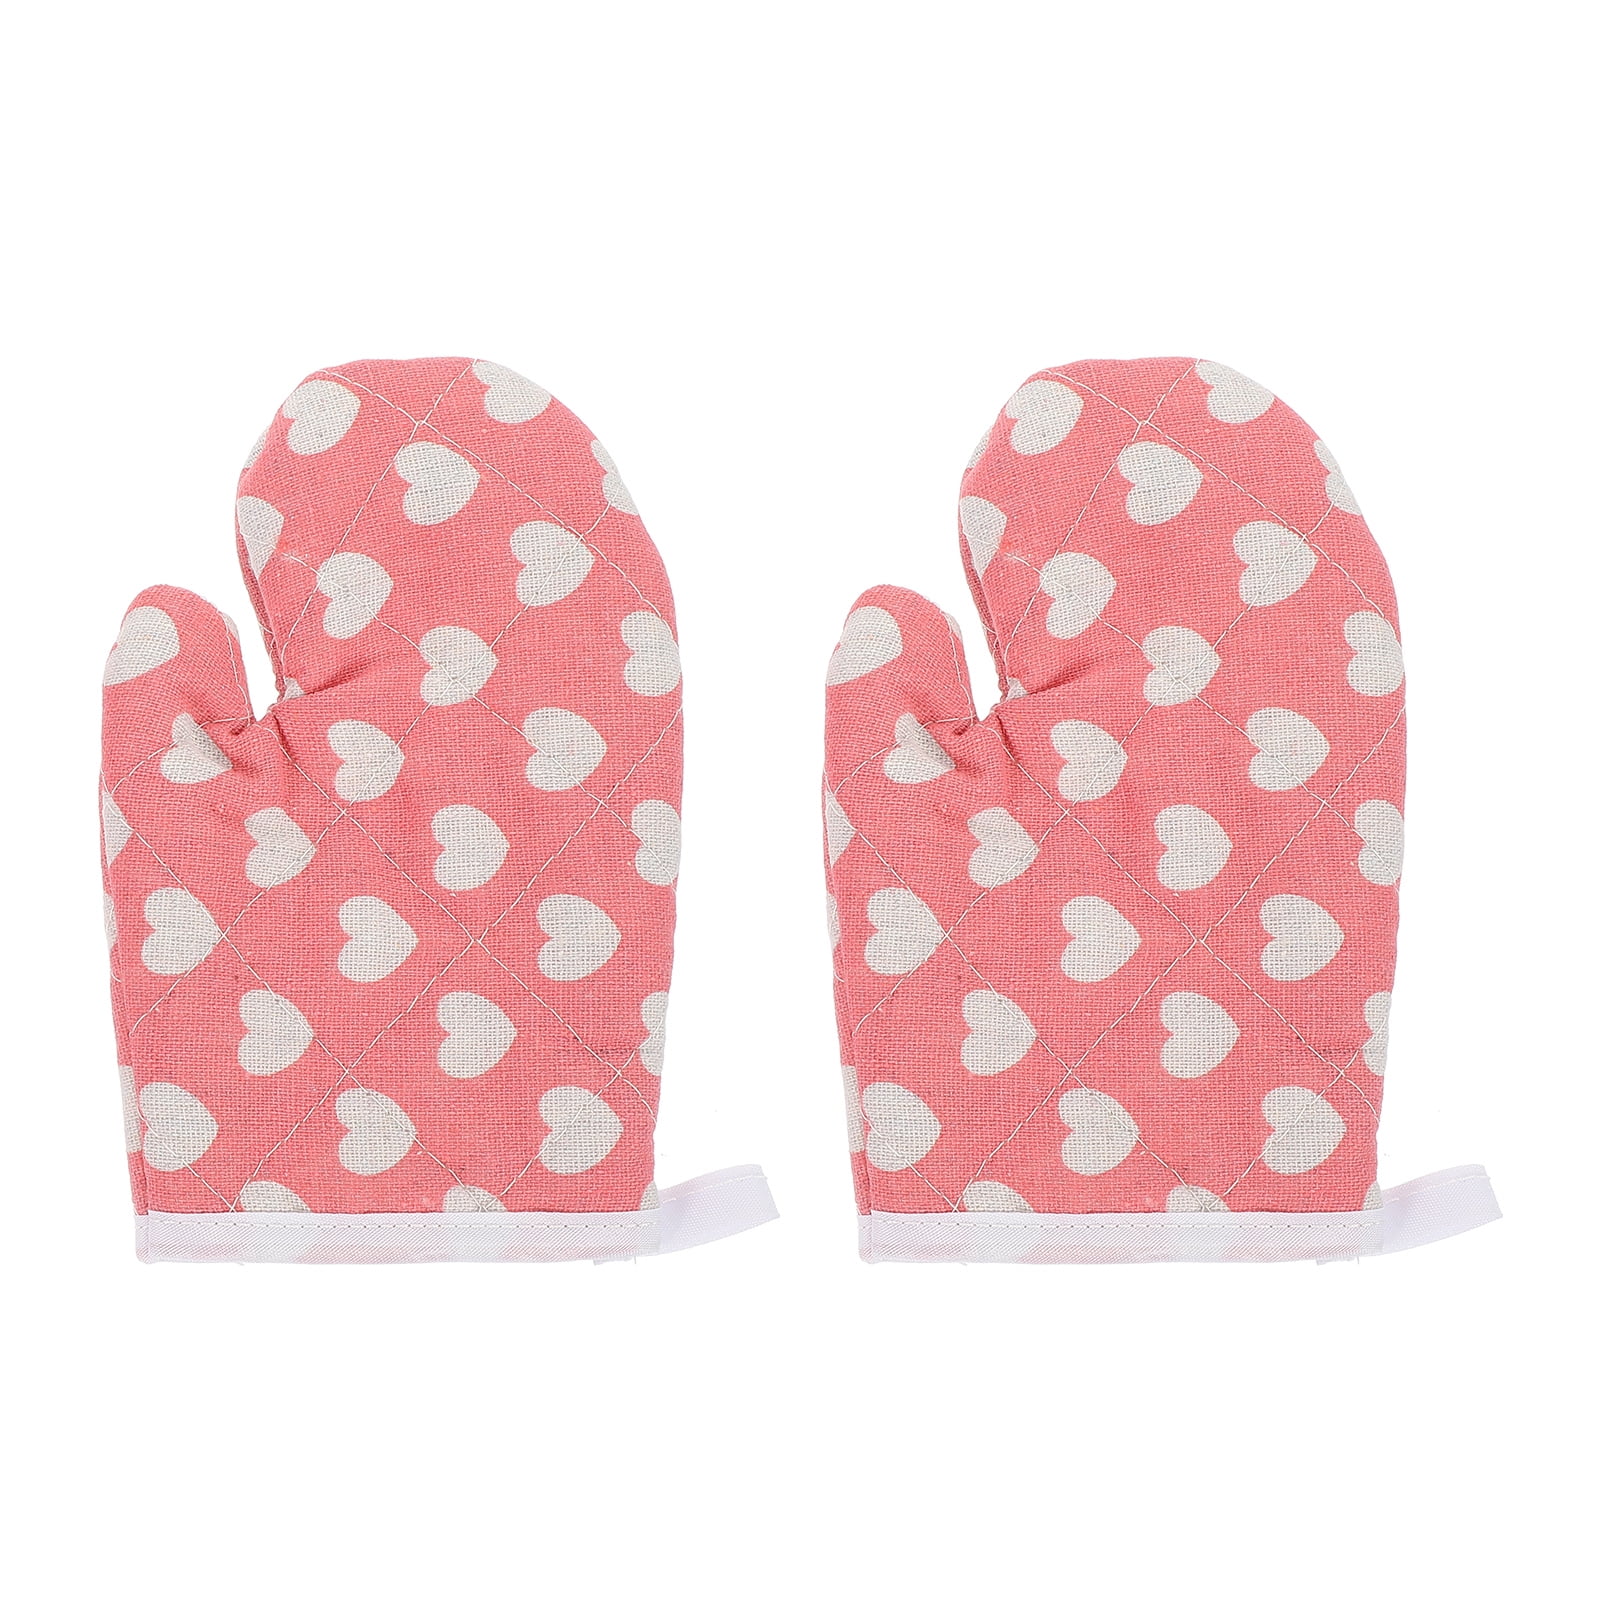 2pcs Kids Oven Mitts Heat Resistant Oven Gloves Kitchen Mitts Microwave Gloves for Children Baking Cooking Fireplace Grill BBQ Pink